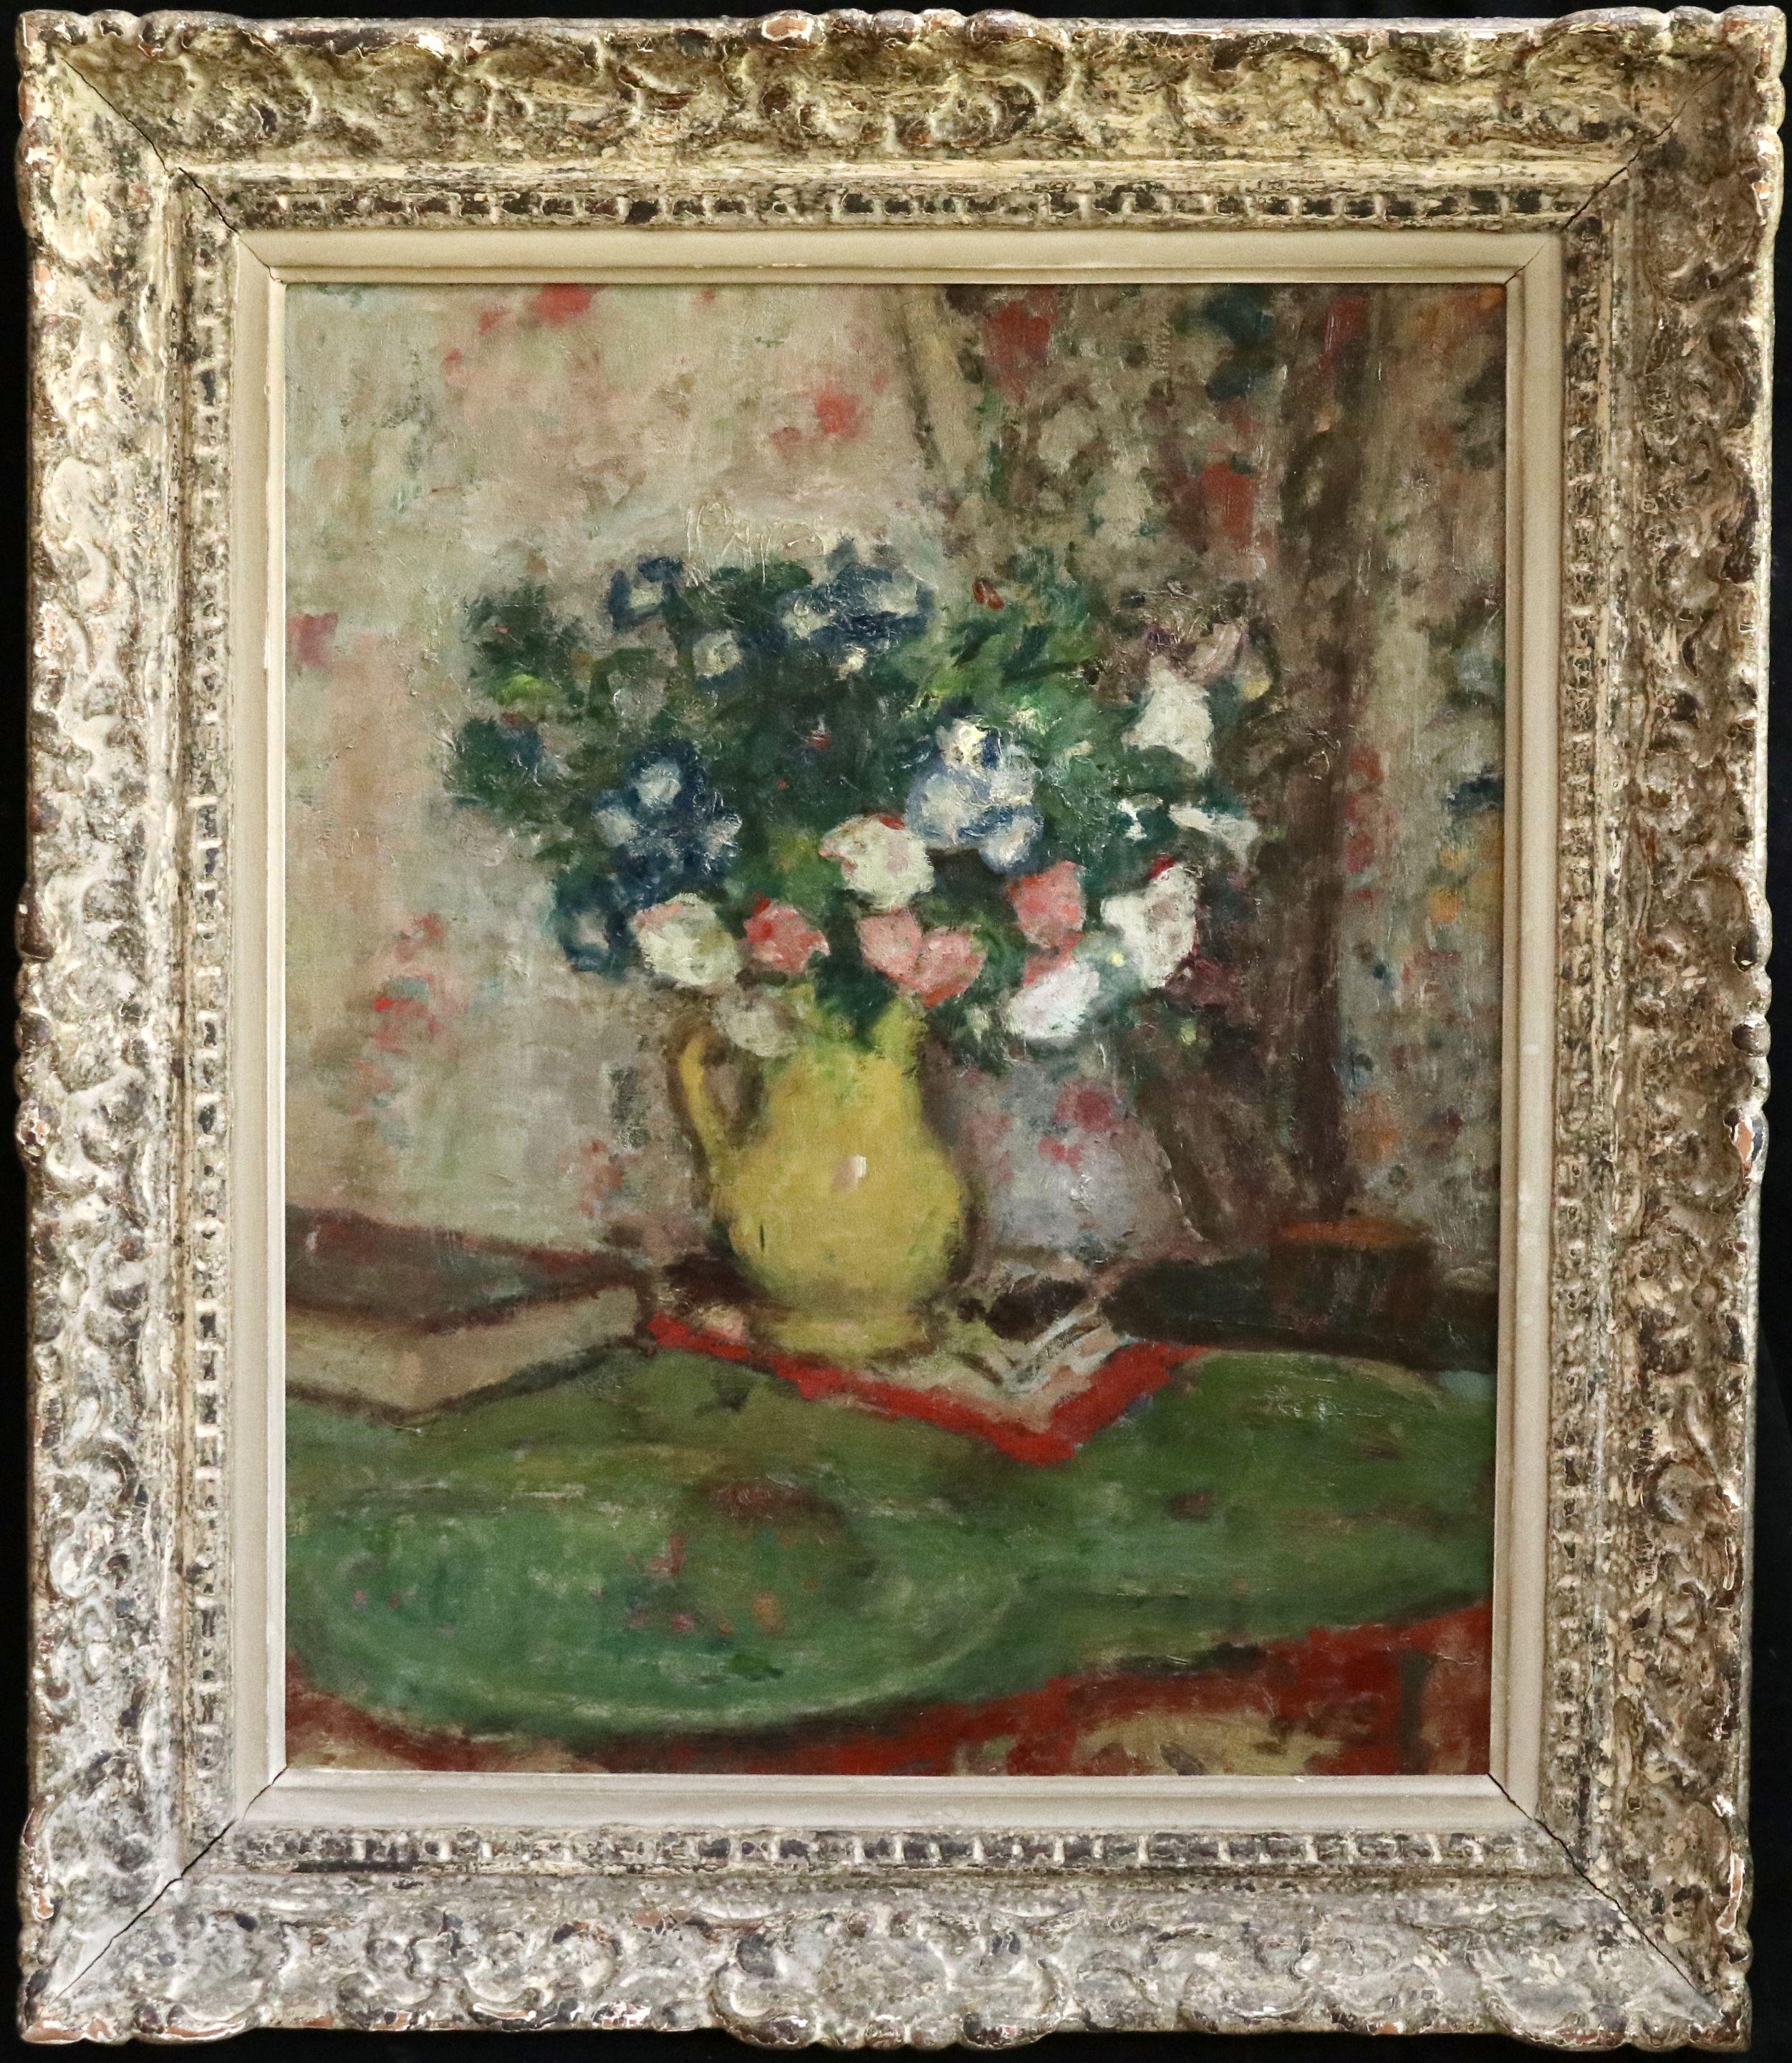 Fleurs - 20th Century Oil, Vase of Flowers in Interior by Georges D'Espagnat 5